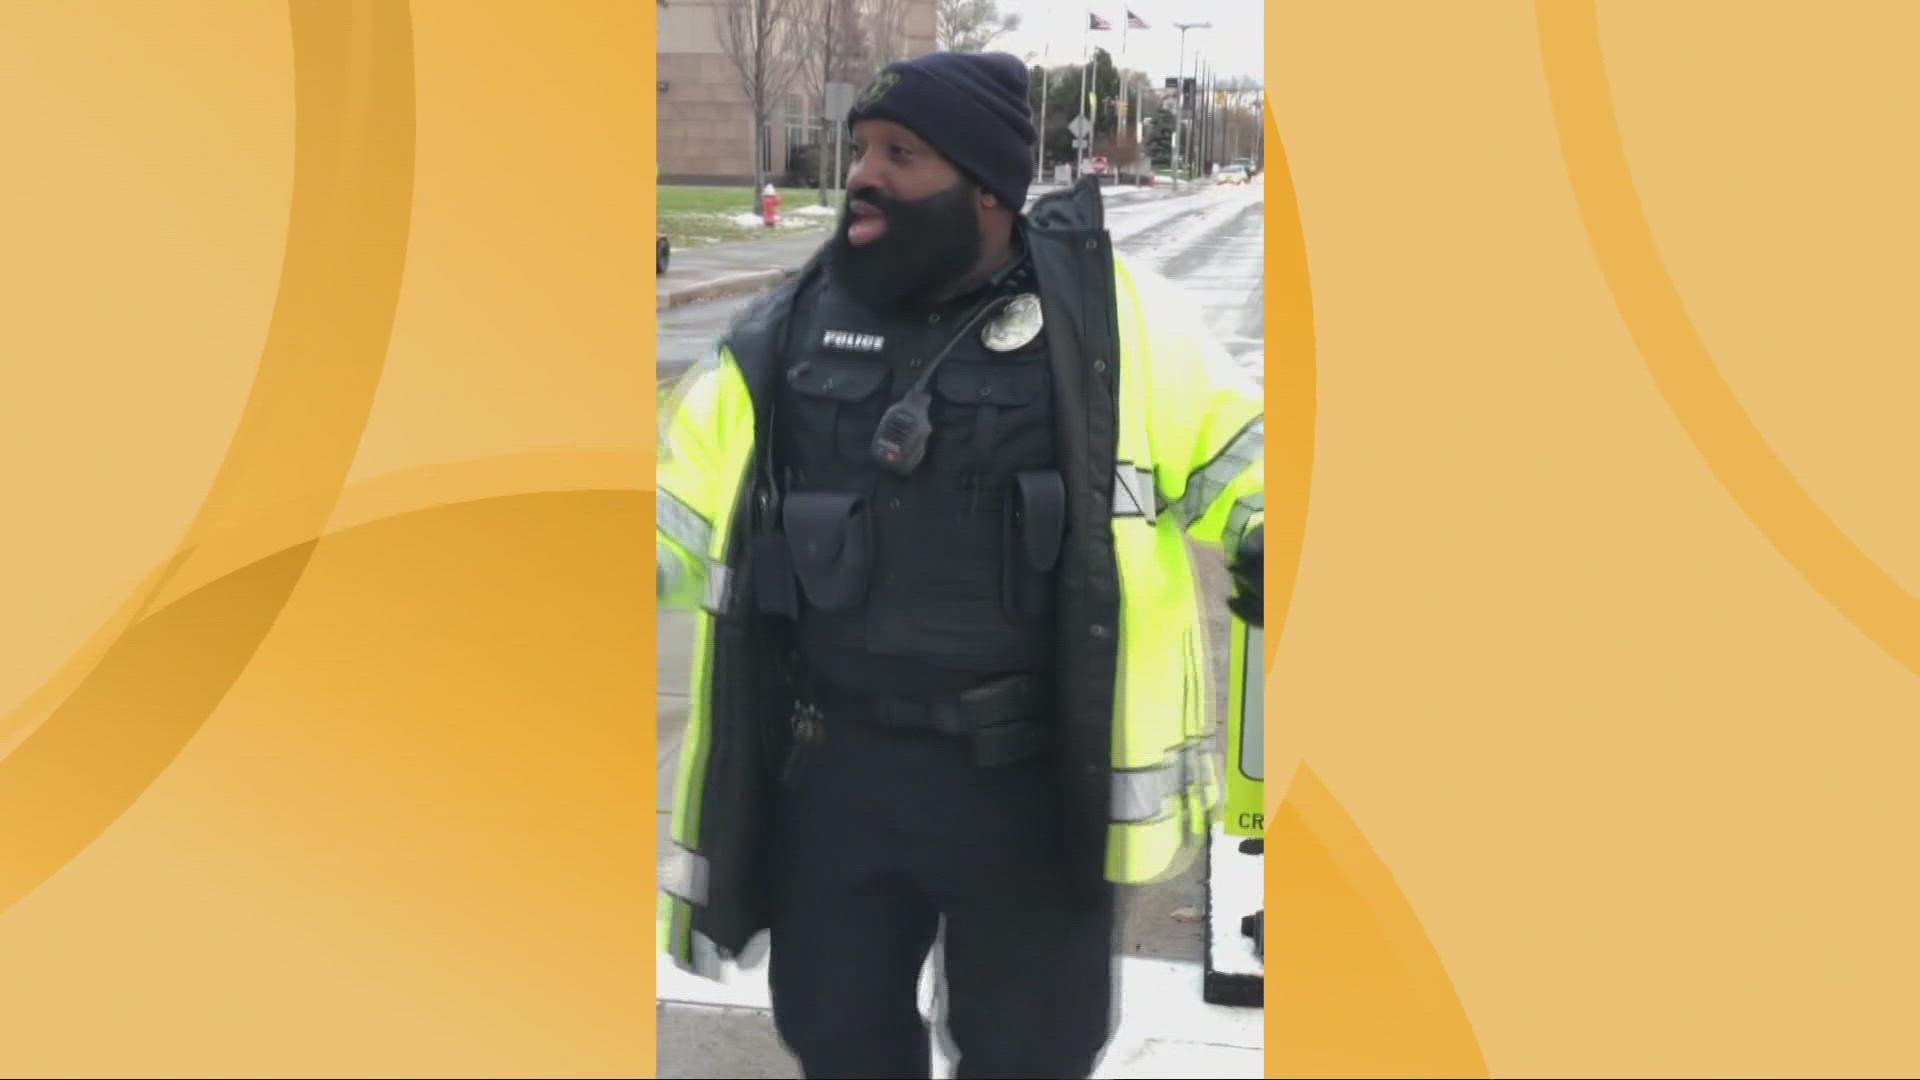 Now THIS will put a smile on your face. Meet Cleveland Clinic police officer Eric Hudson. 'Ain’t no party like an 89th Street party!'